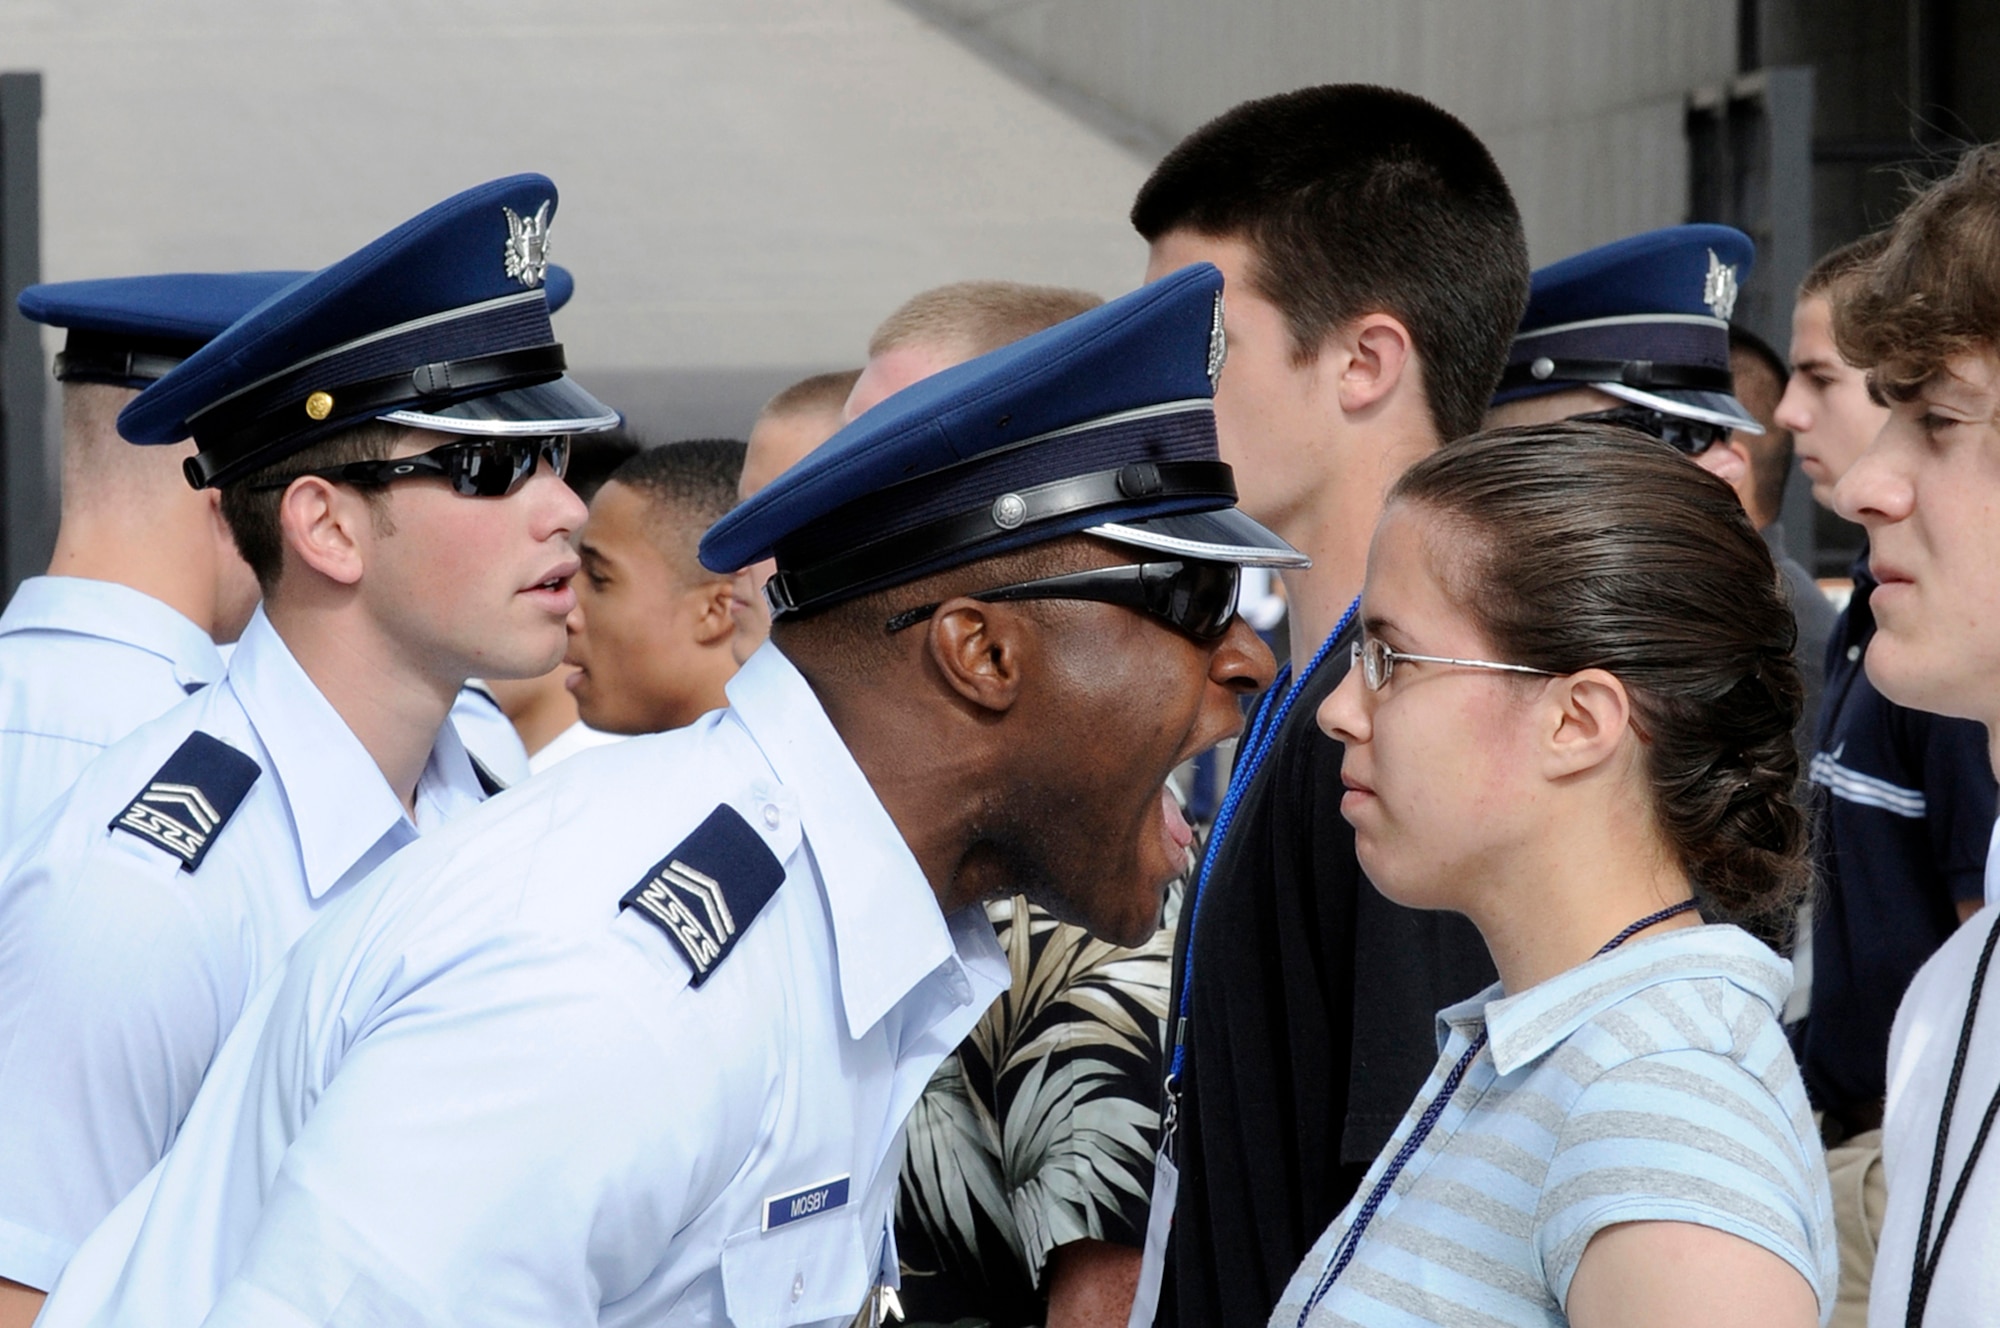 Cadet 2nd Class Mark Mosby ensures new basic cadets follow cadre instructions during cadet inprocessing June 25 at the U.S. Air Force Academy in Colorado Springs, Colo. Approximately 1,400 cadets were selected for the Class of 2013 out of nearly 10,000 applicants. (U.S. Air Force photo/Dave Ahlschwede)